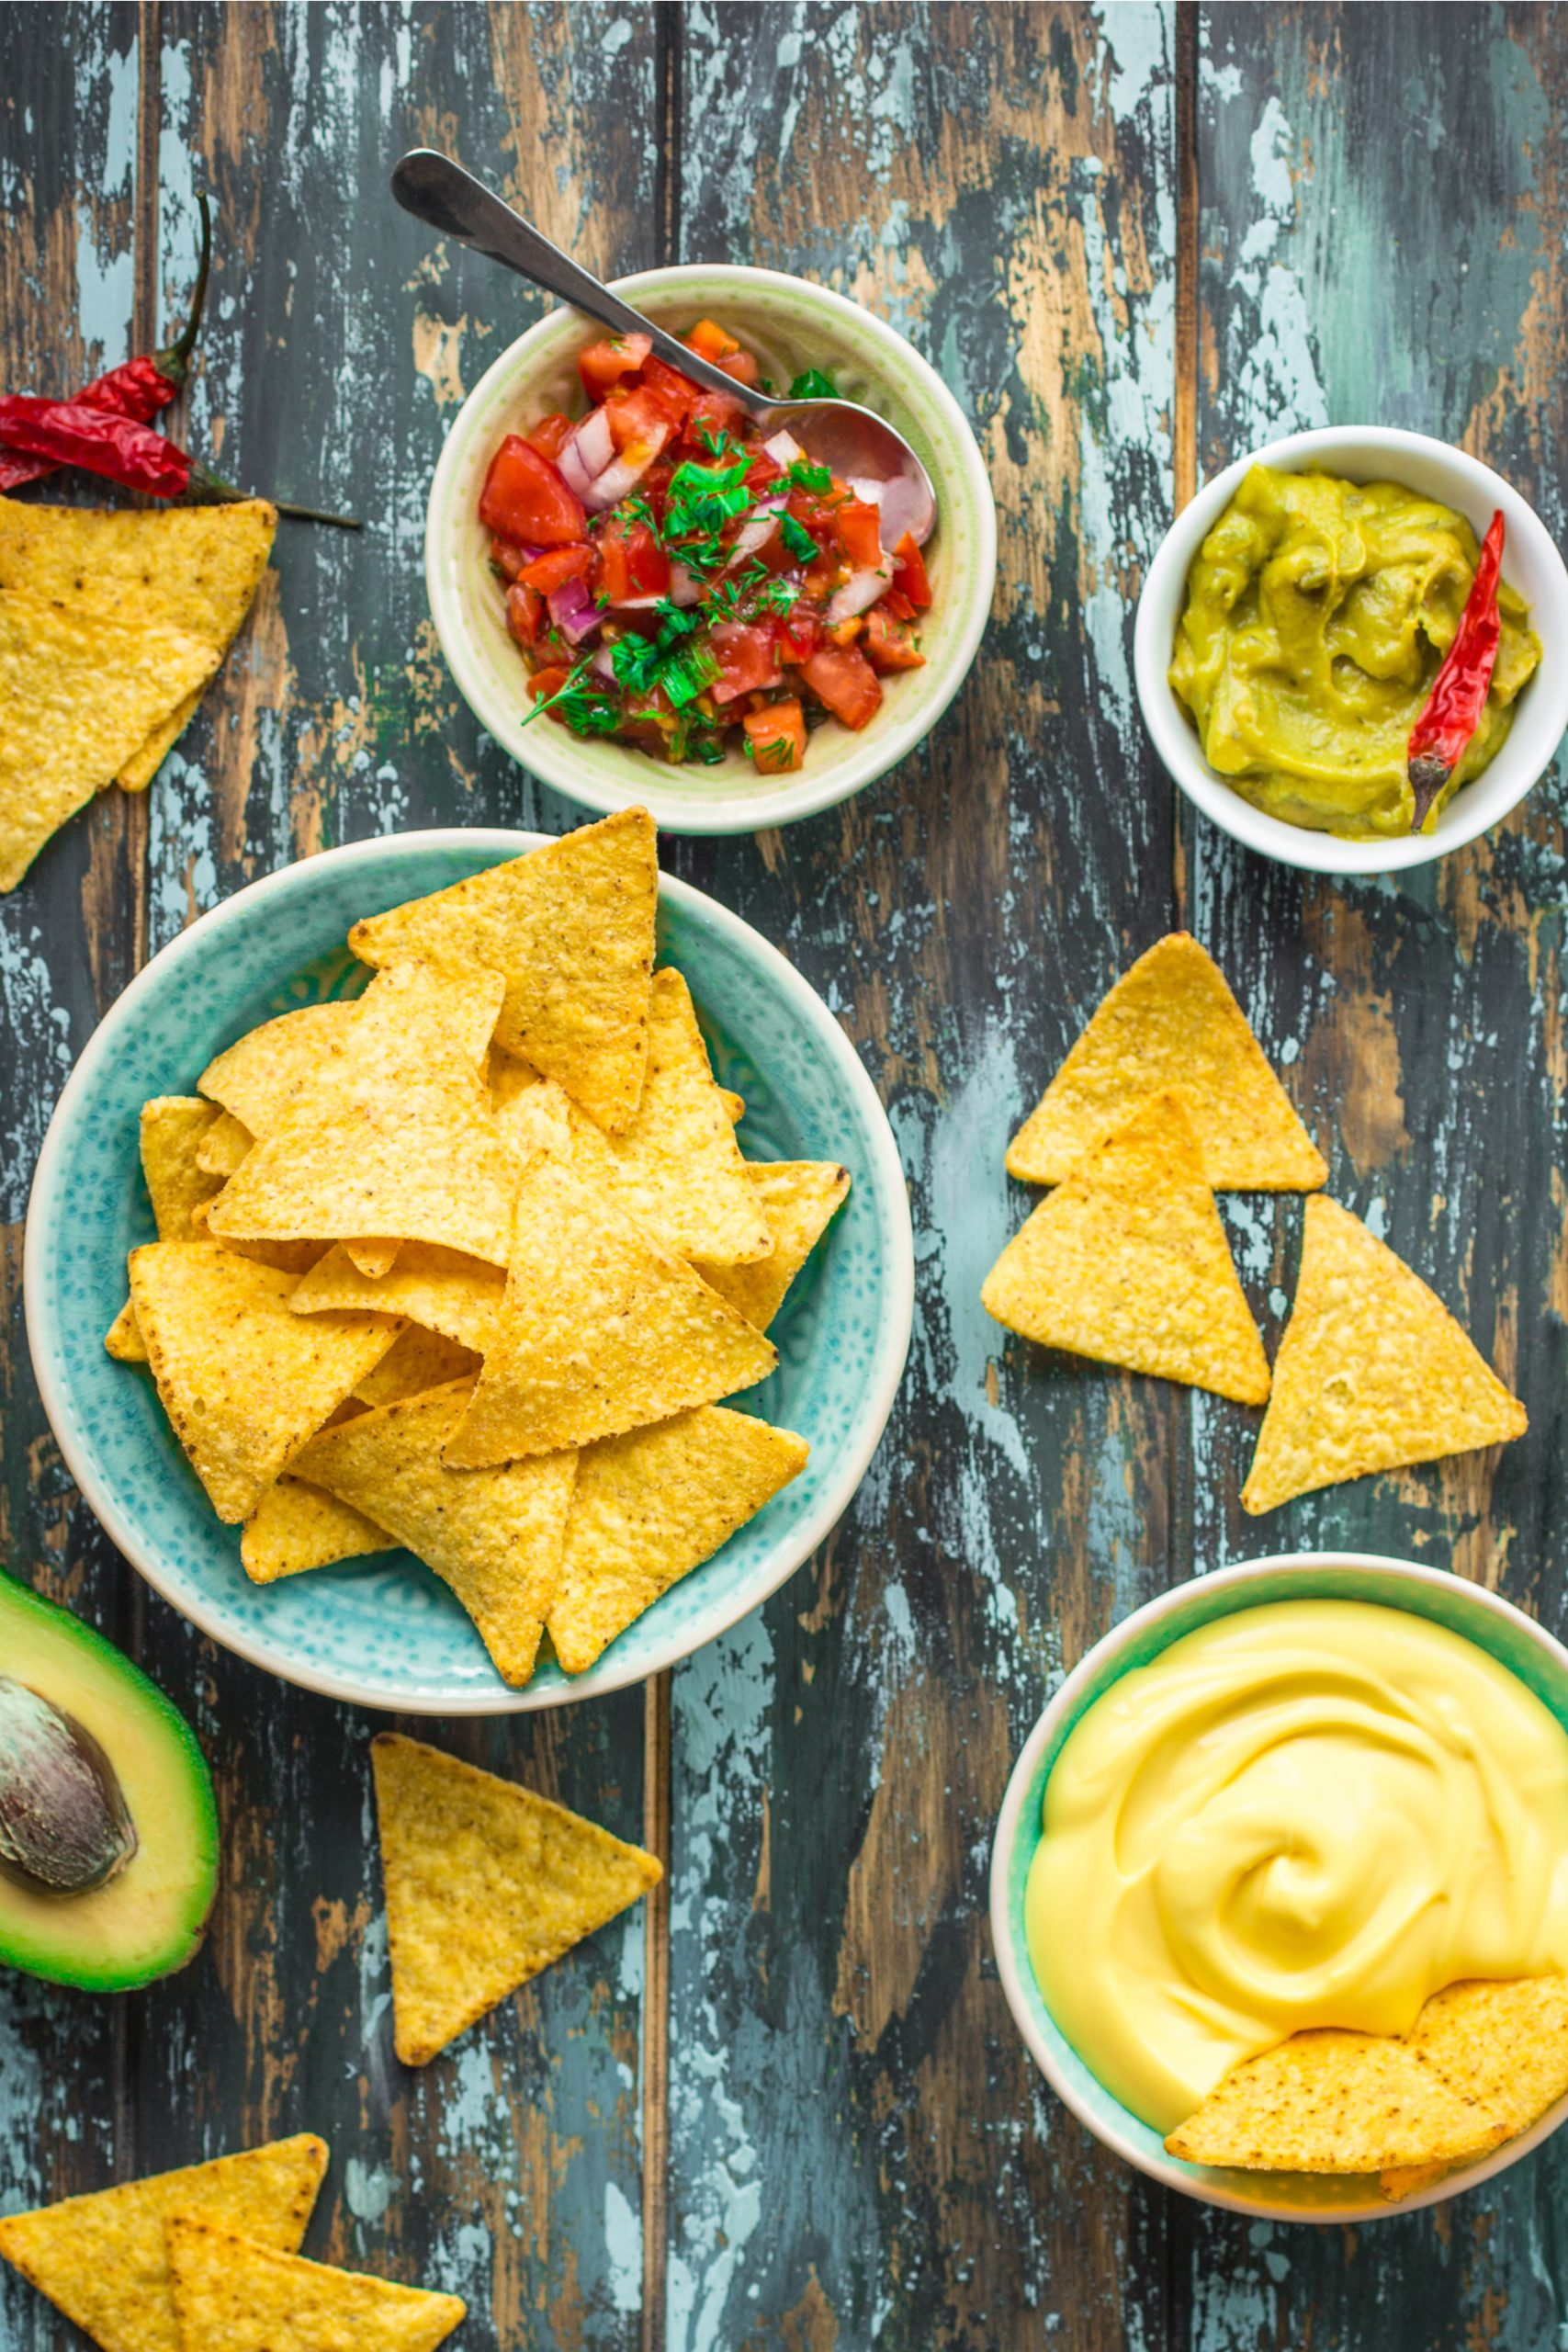 Guacamole, chips and salsa on a wooden table.